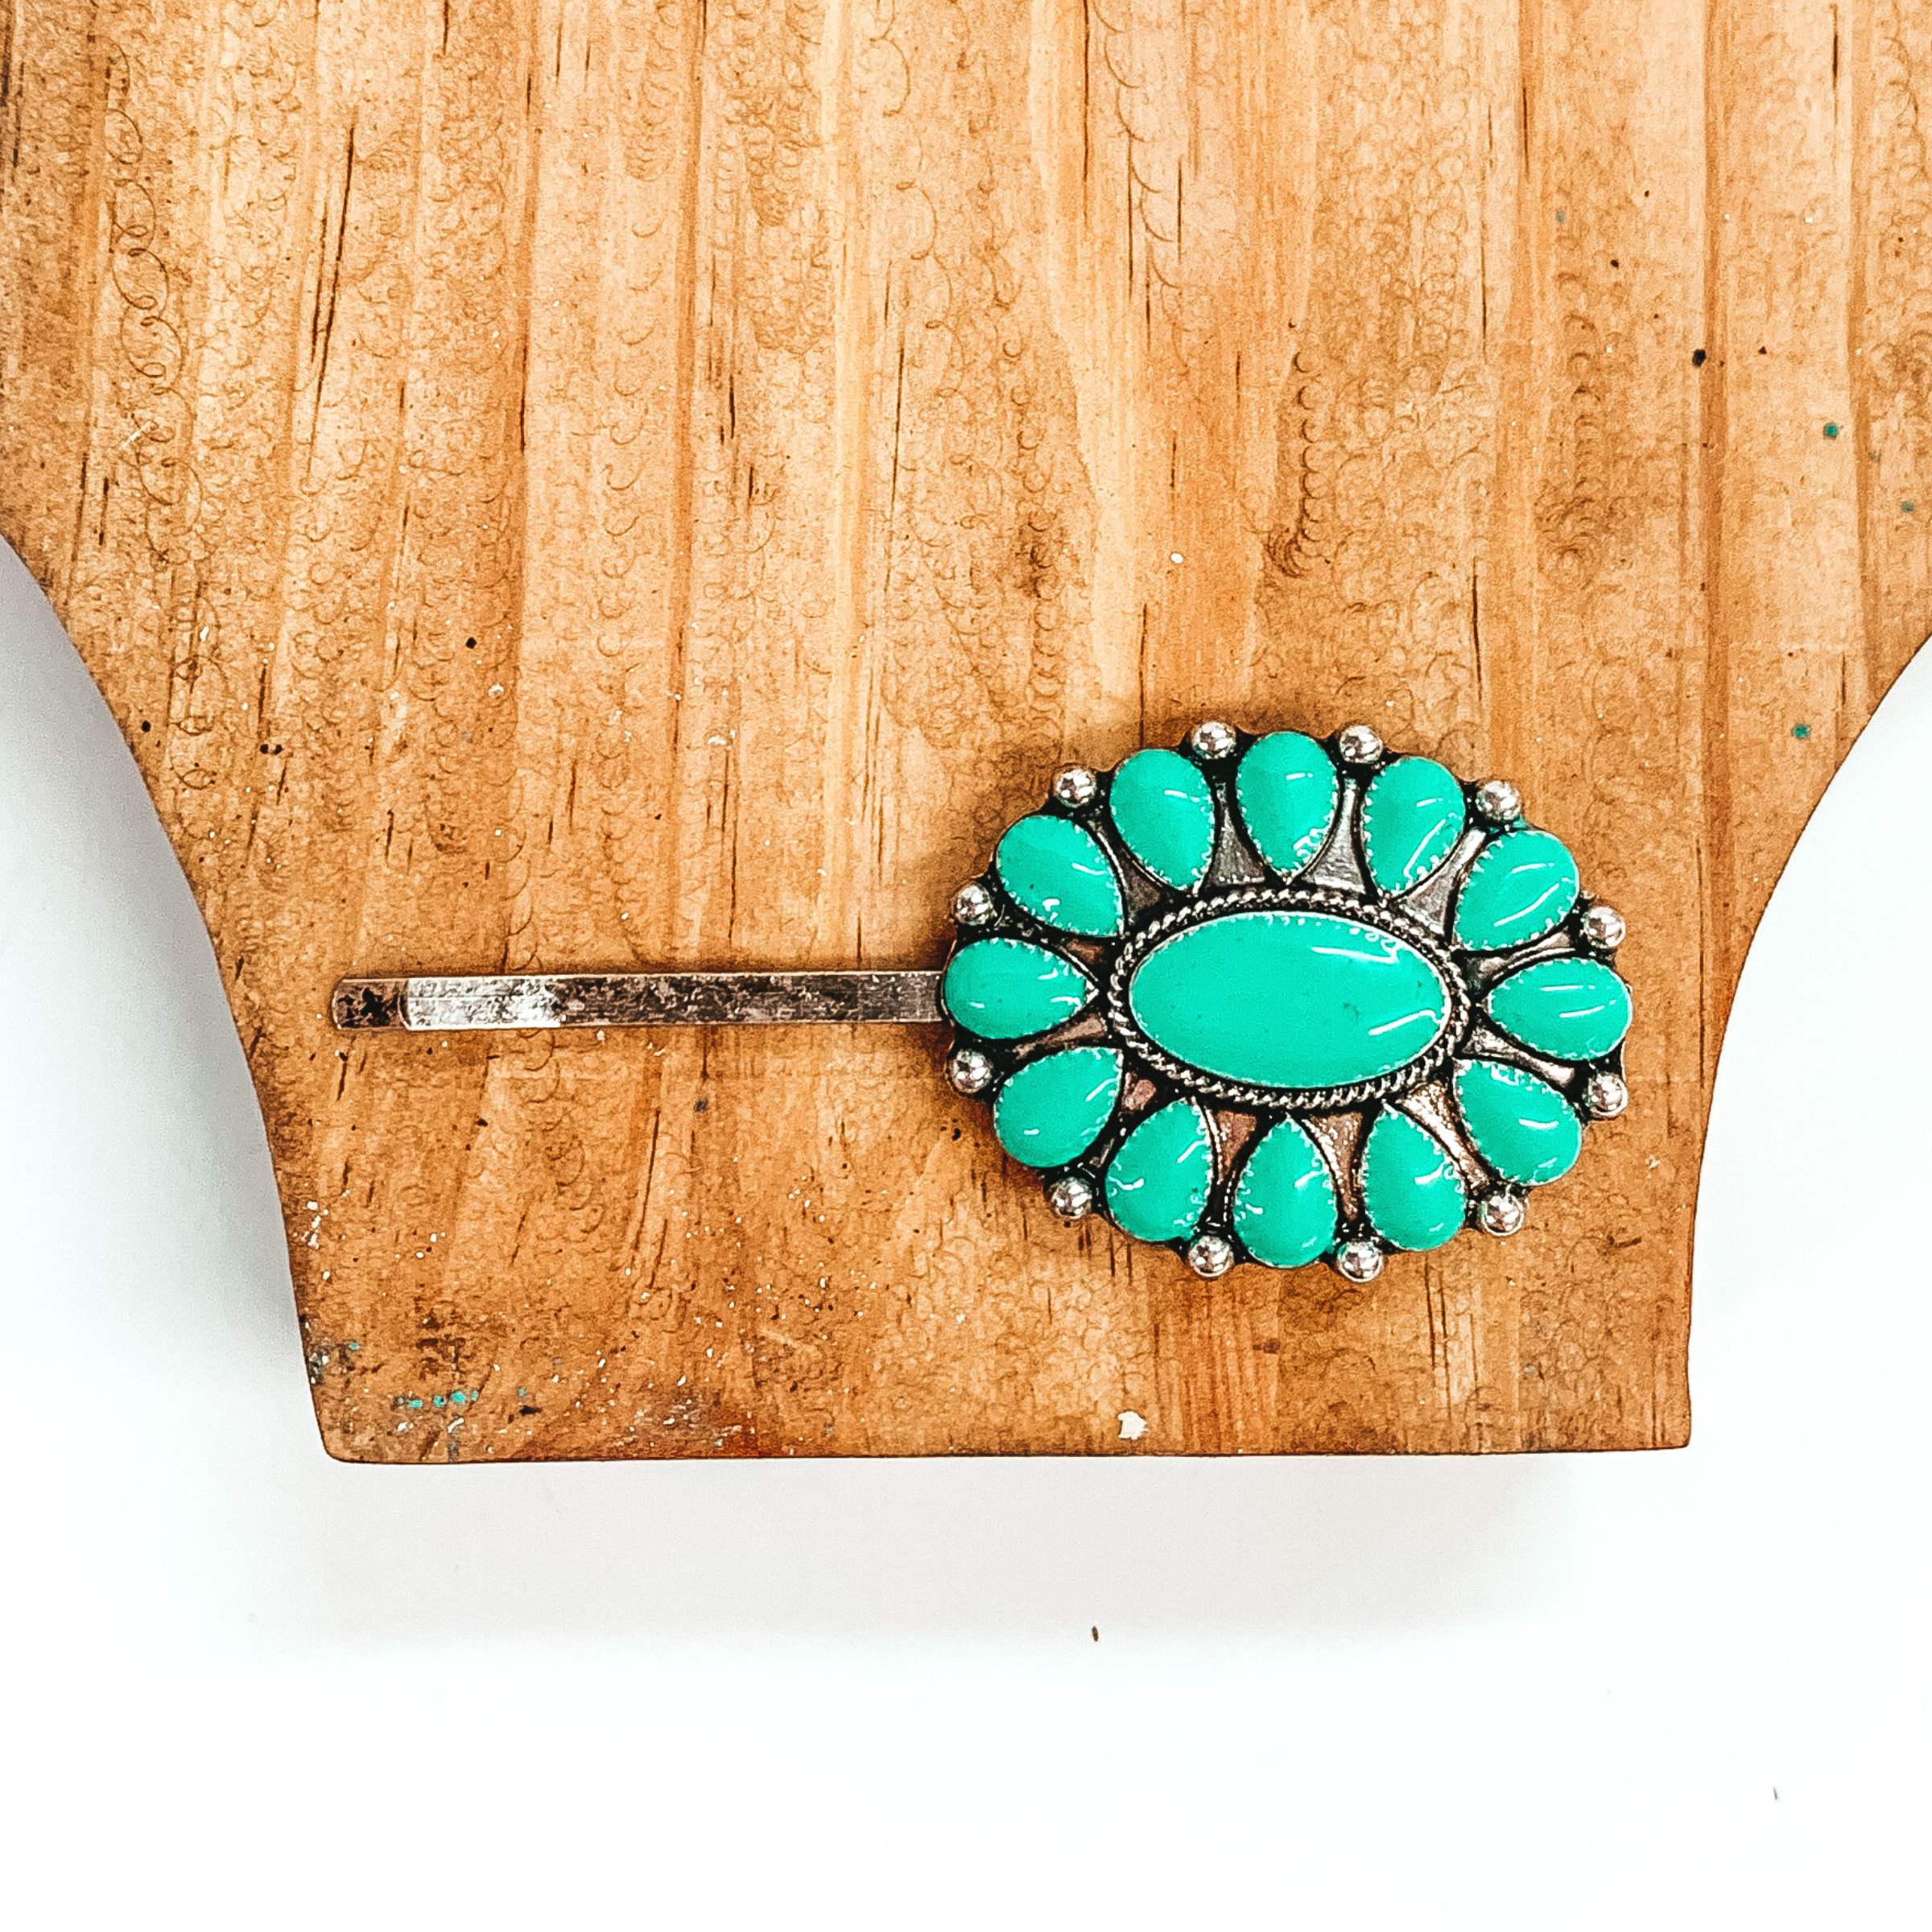 Silver hair pin with a silver oval pendant that has turquoise stones. This hair pin is pictured on a brown block on a white background. 